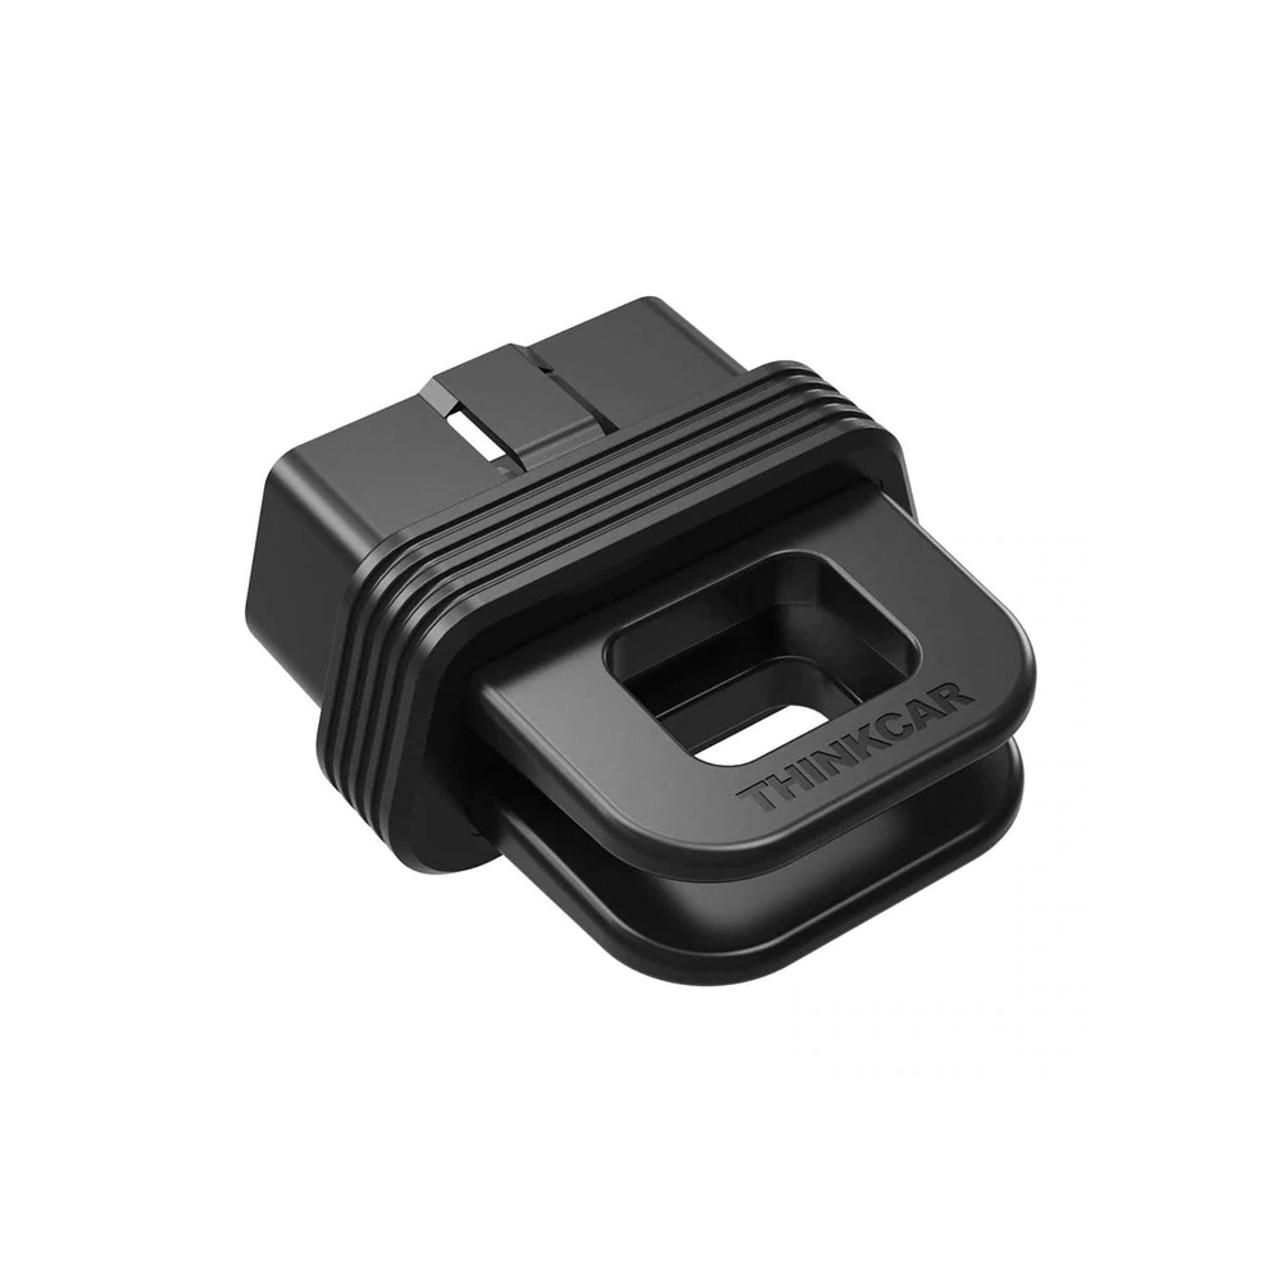 THINKCAR THINKOBD 100 - OBD2 Scanner Engine Fault Code Reader with Full OBD2  Functions